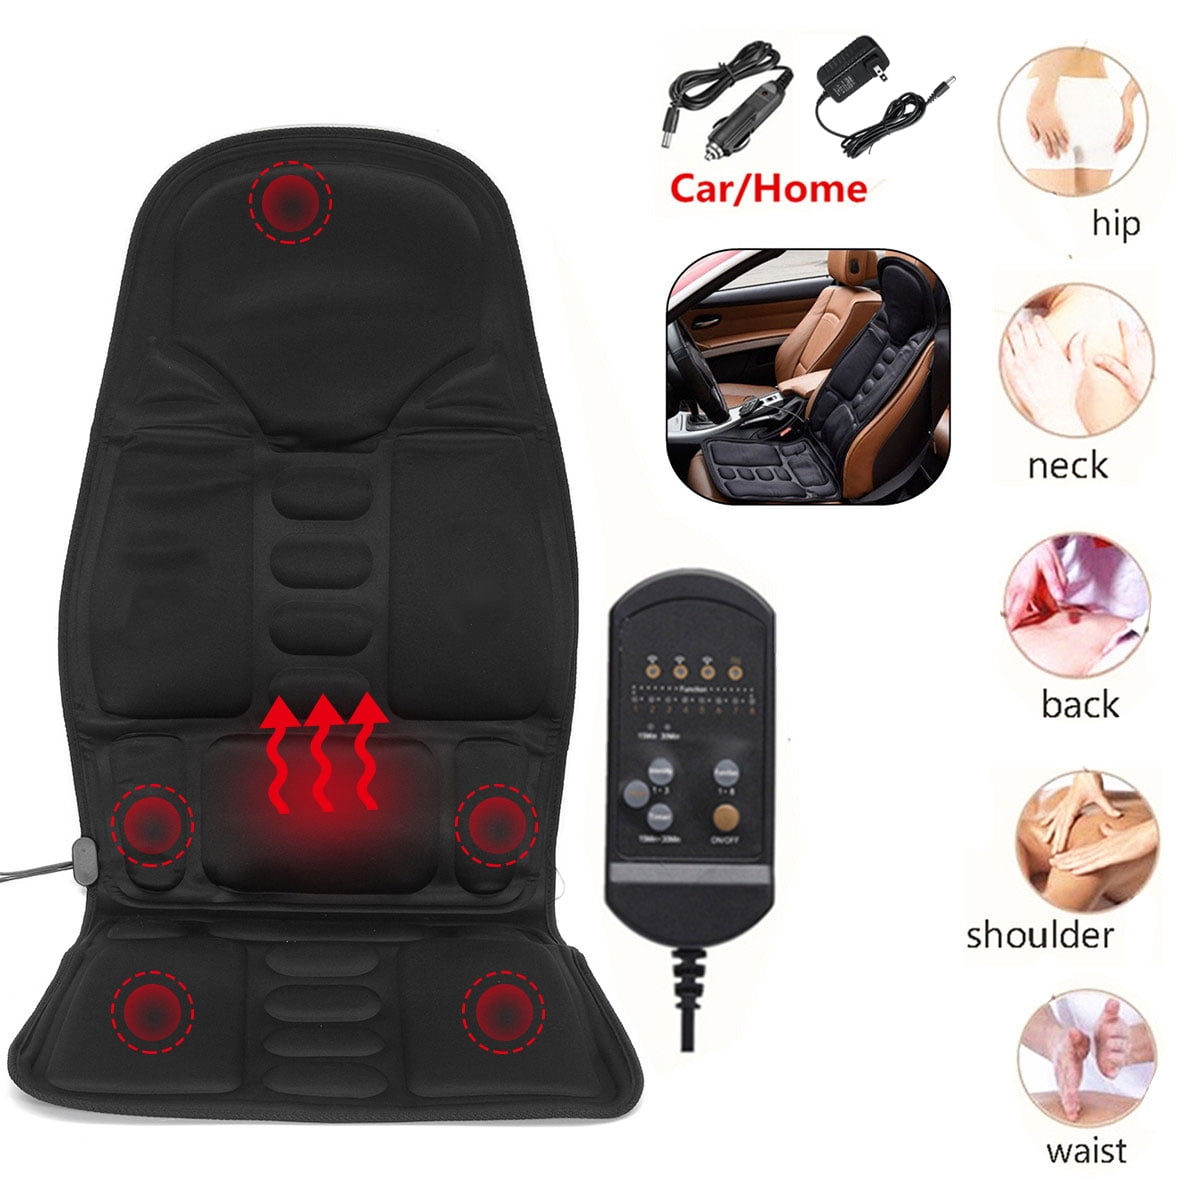 Massage chair pad for car